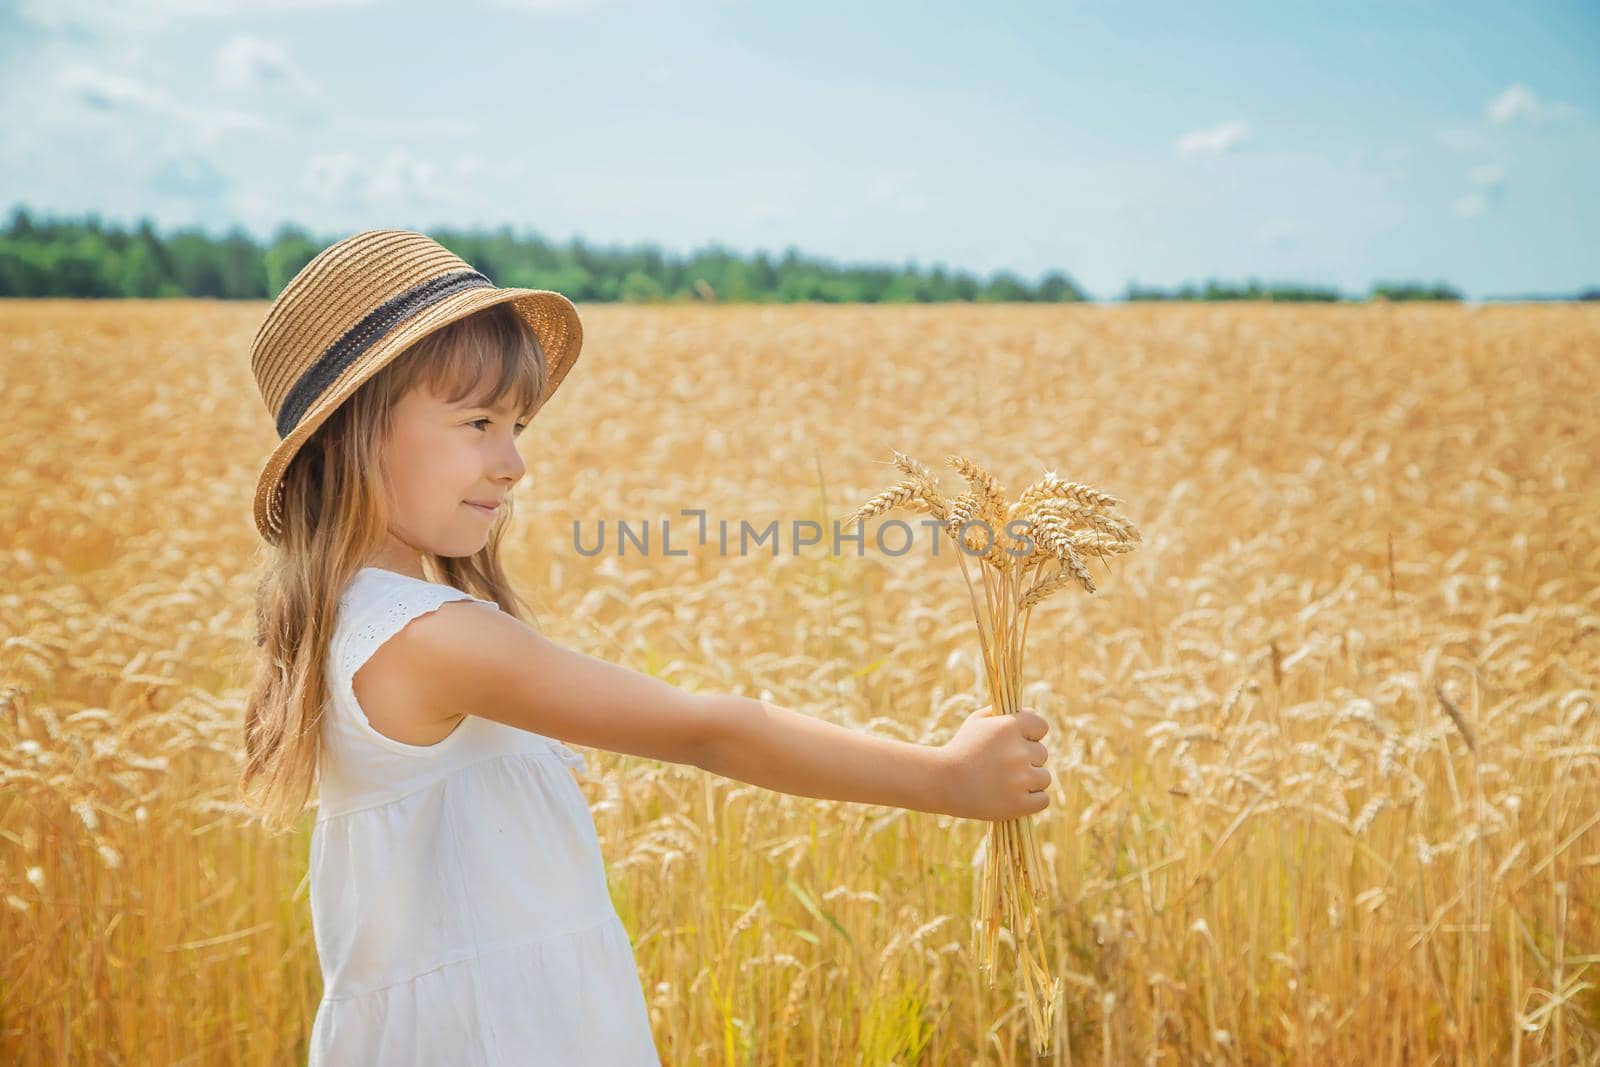 A child in a wheat field. Selective focus. by yanadjana